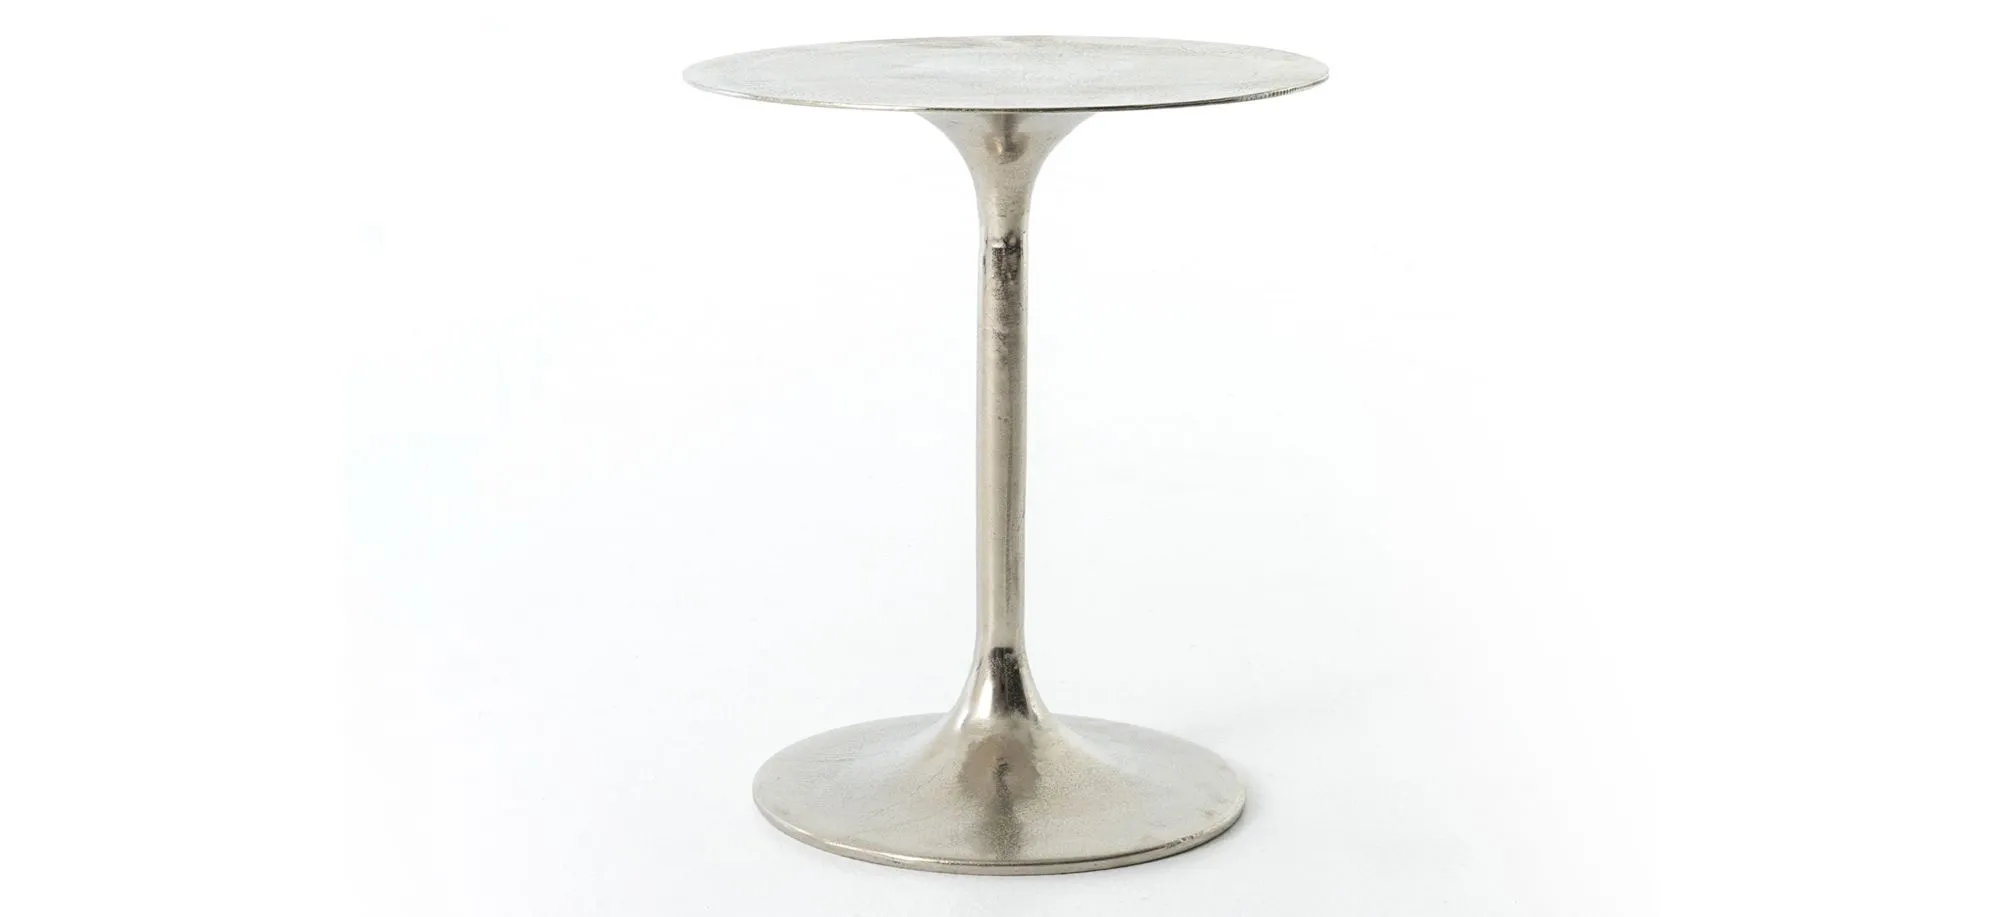 Tulip Round Side Table in Raw Nickel by Four Hands